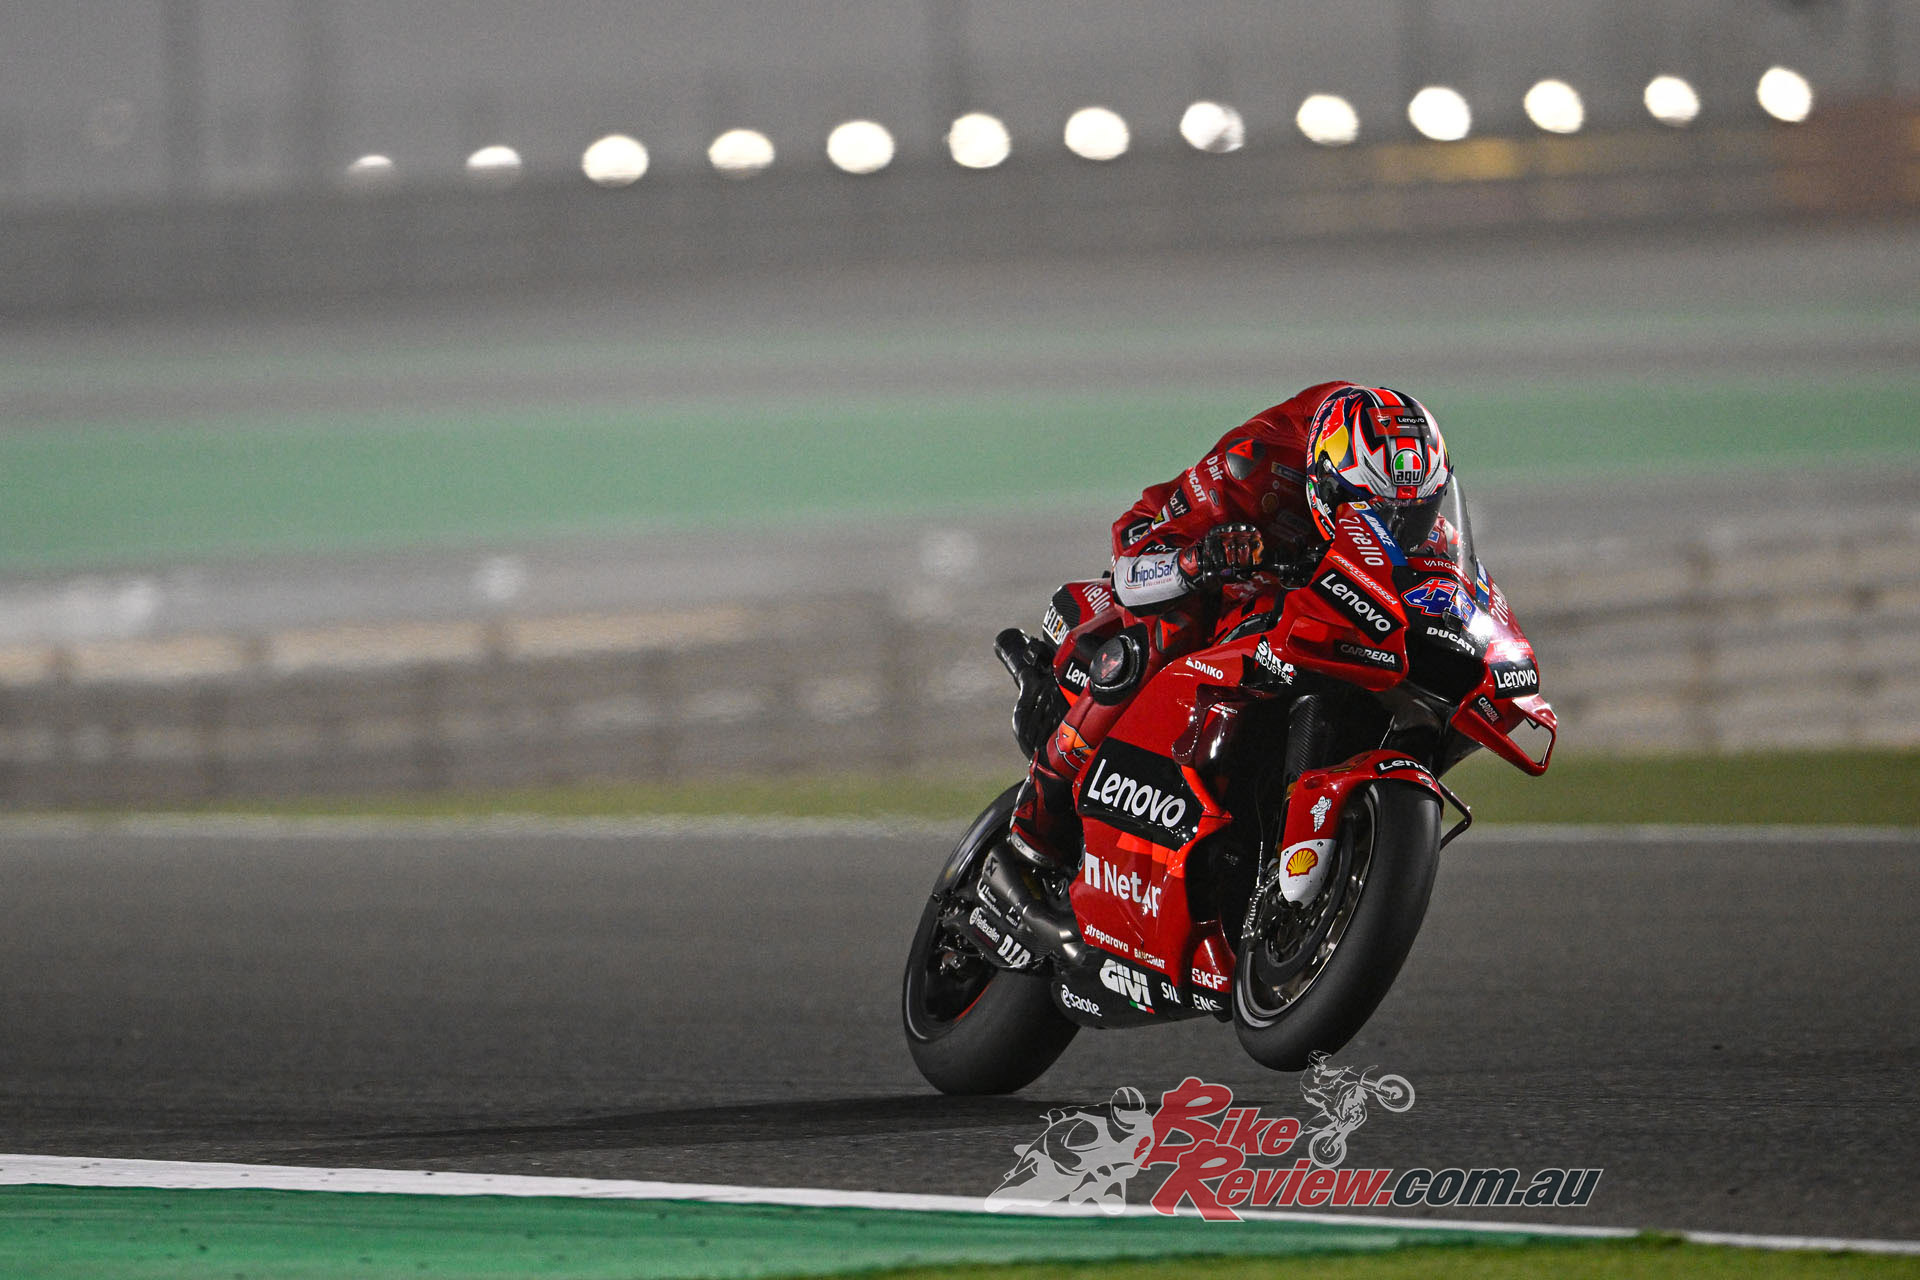 Unlucky end of the weekend for the Ducati Lenovo Team in Qatar with Miller and Bagnaia both forced to retire.